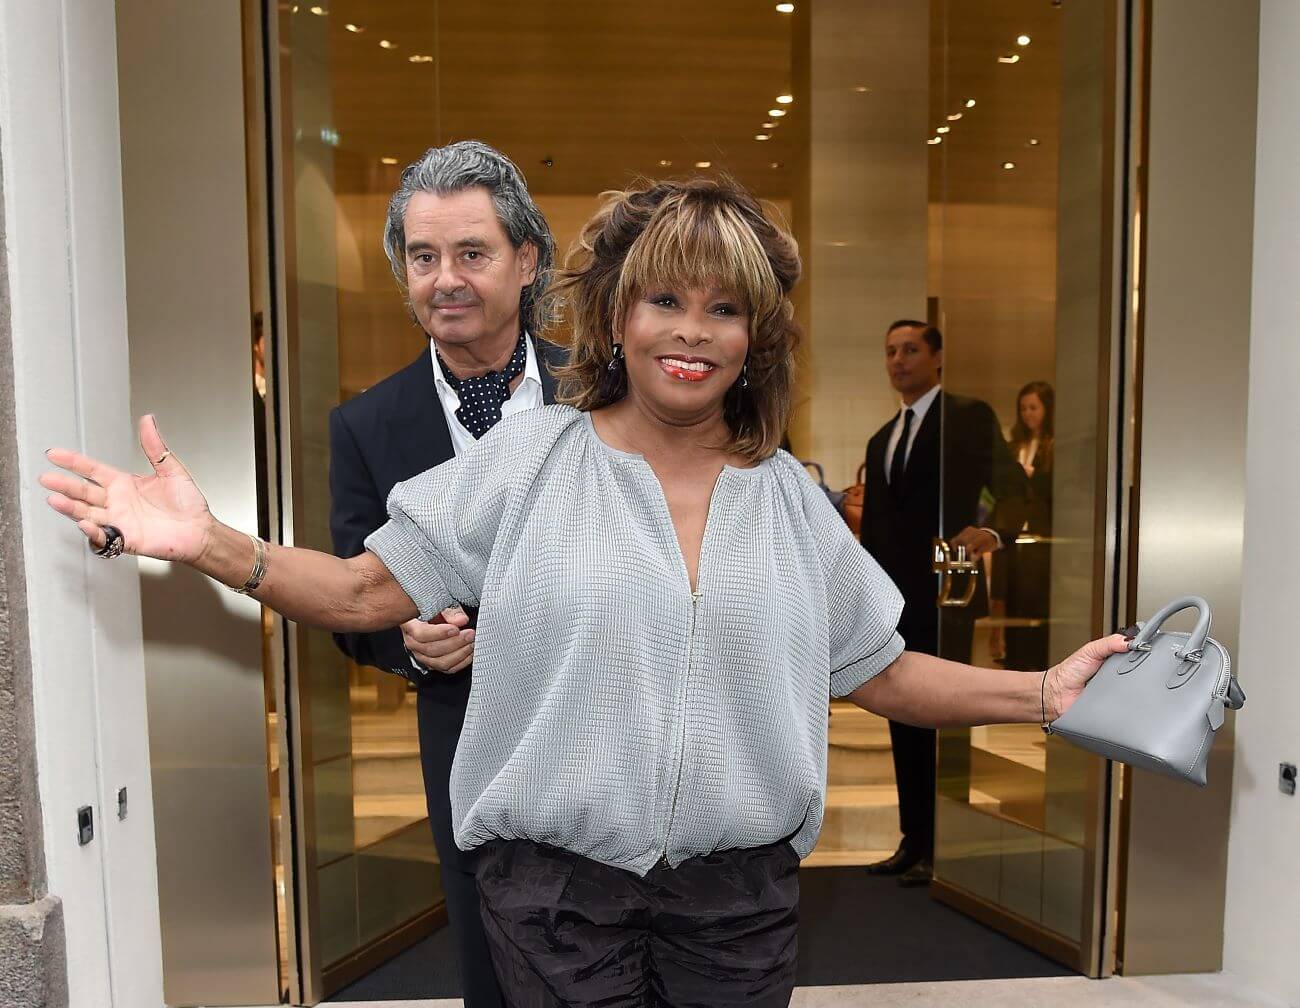 Tina Turner wears silver and holds a matching purse while her husband, Erwin Bach stands behind her.